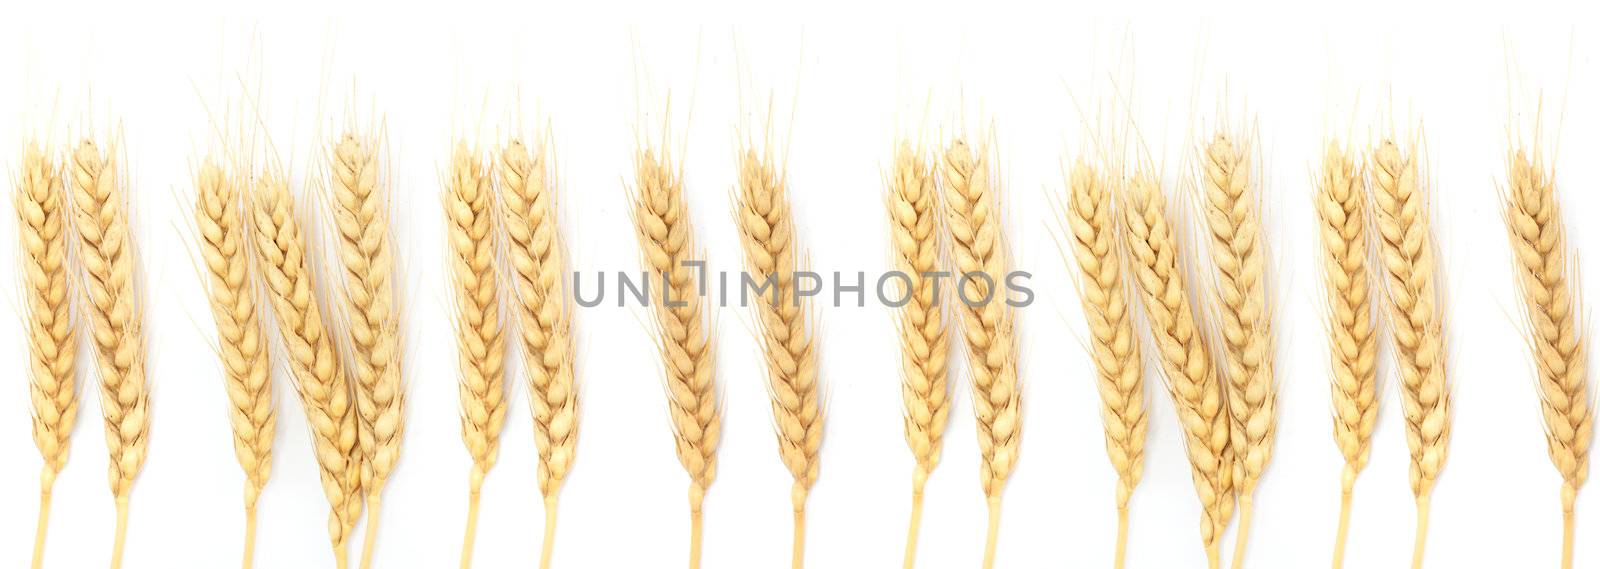 Wheat ears isolated on white  by schankz